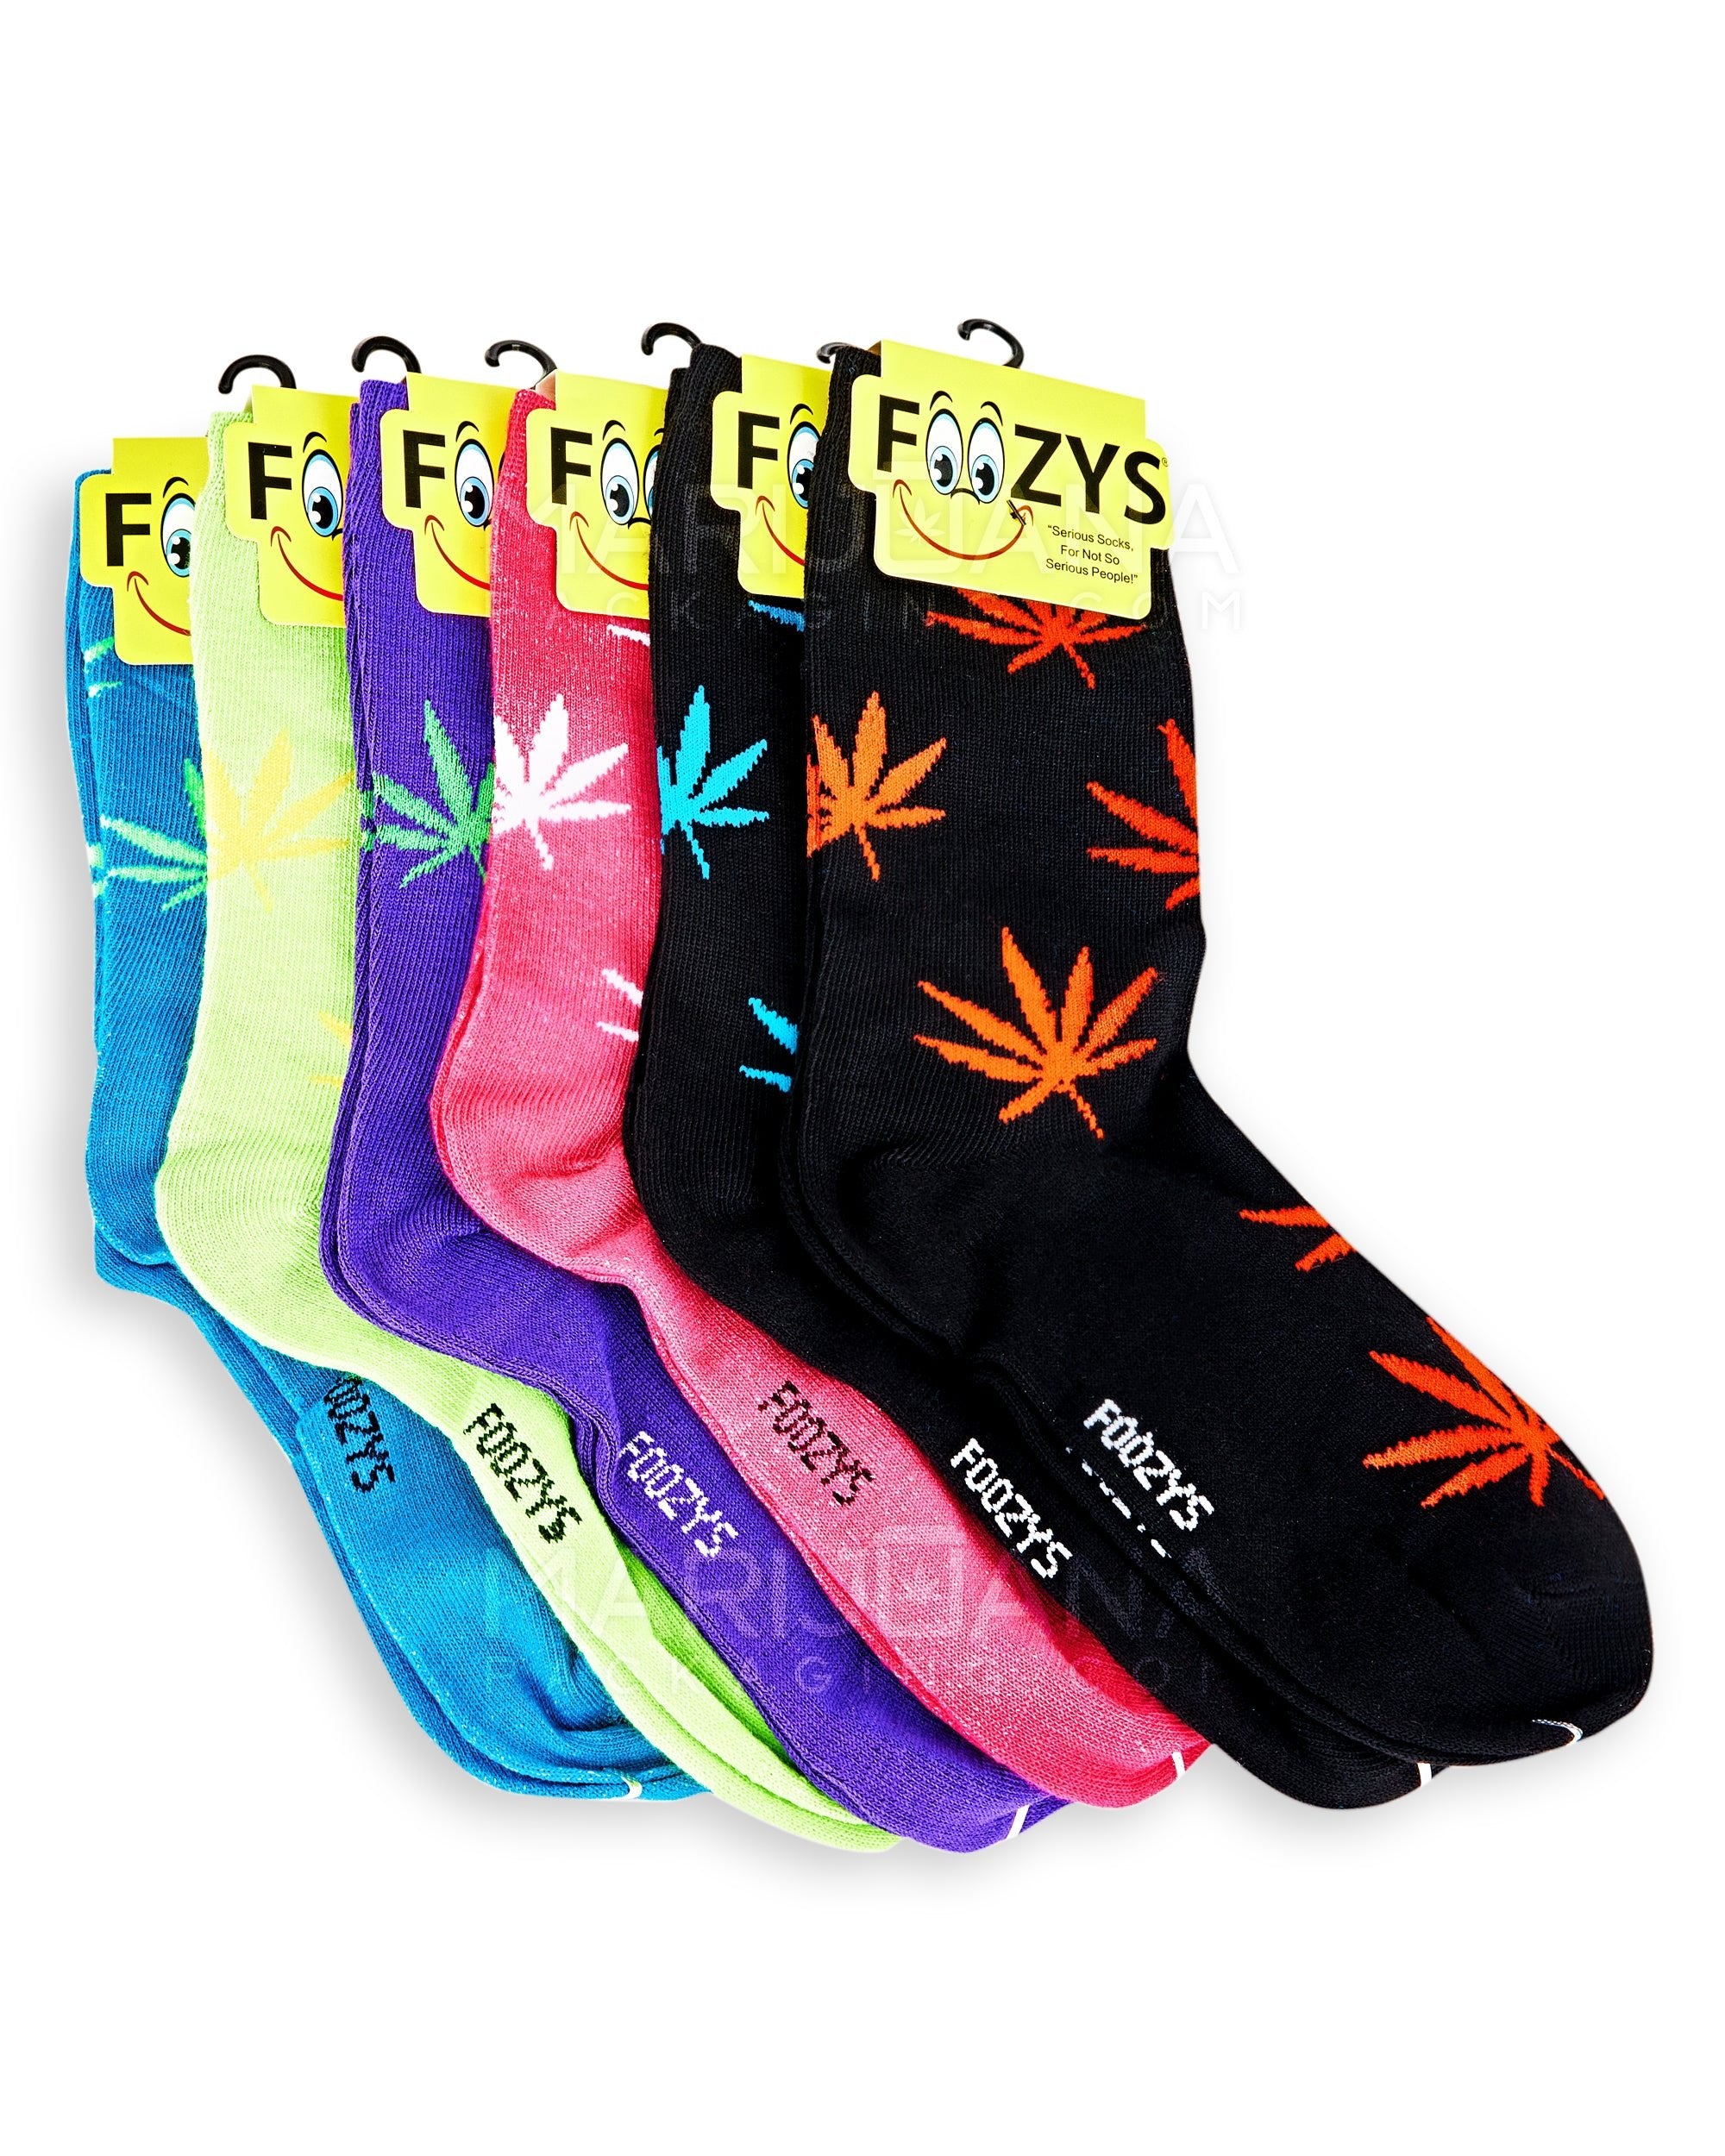 FOOZY | Women's Leaf Crew Socks | Assorted Sizes - Assorted - 12 Count - 1